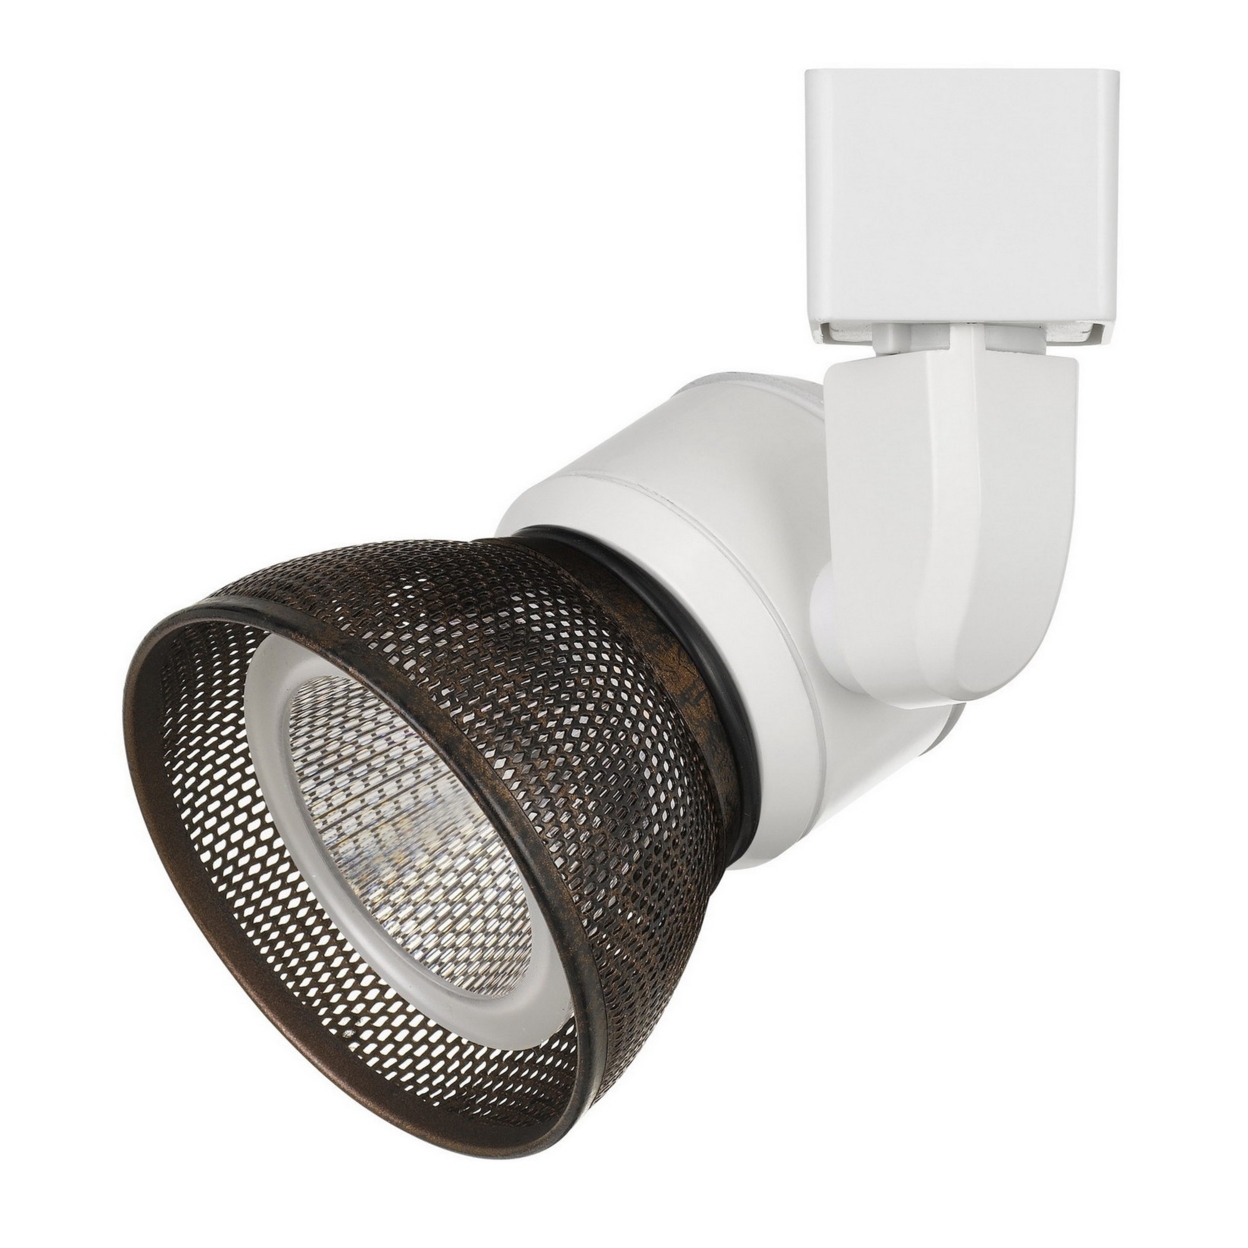 10W Integrated LED Metal Track Fixture With Mesh Head, White And Bronze- Saltoro Sherpi